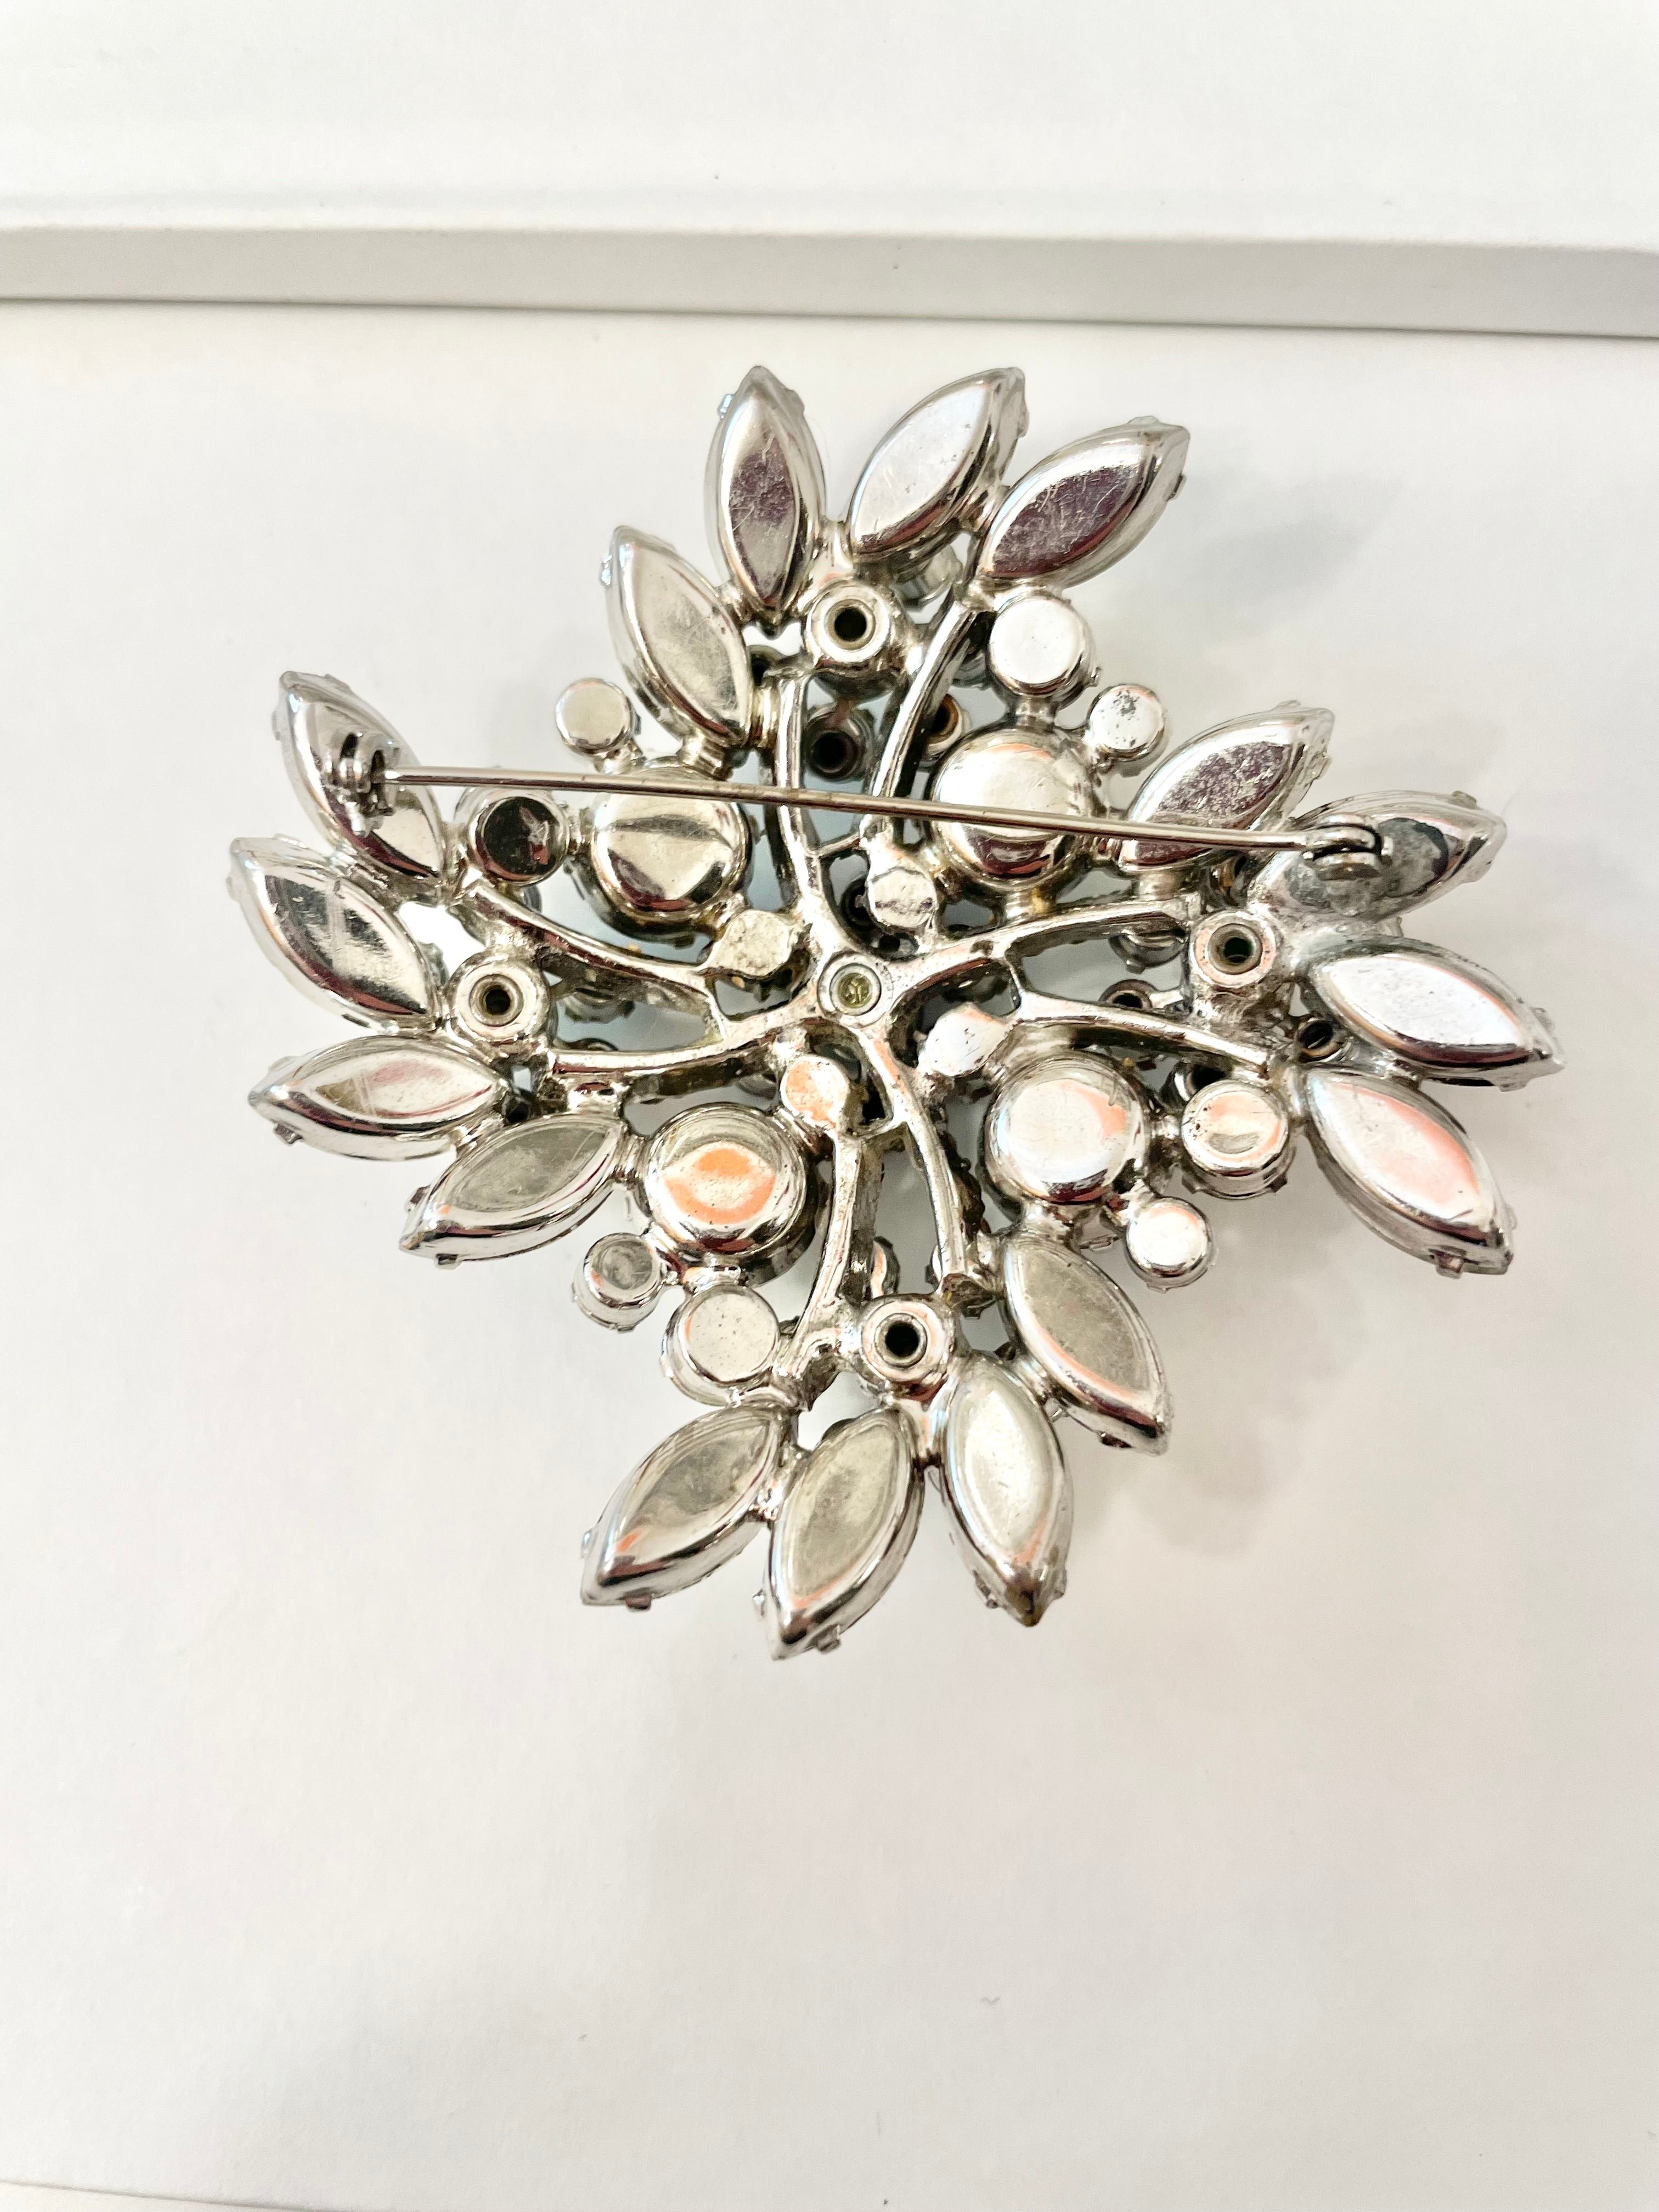 1960's shimmer delightful, large and show stopping brooch! So extraordinary